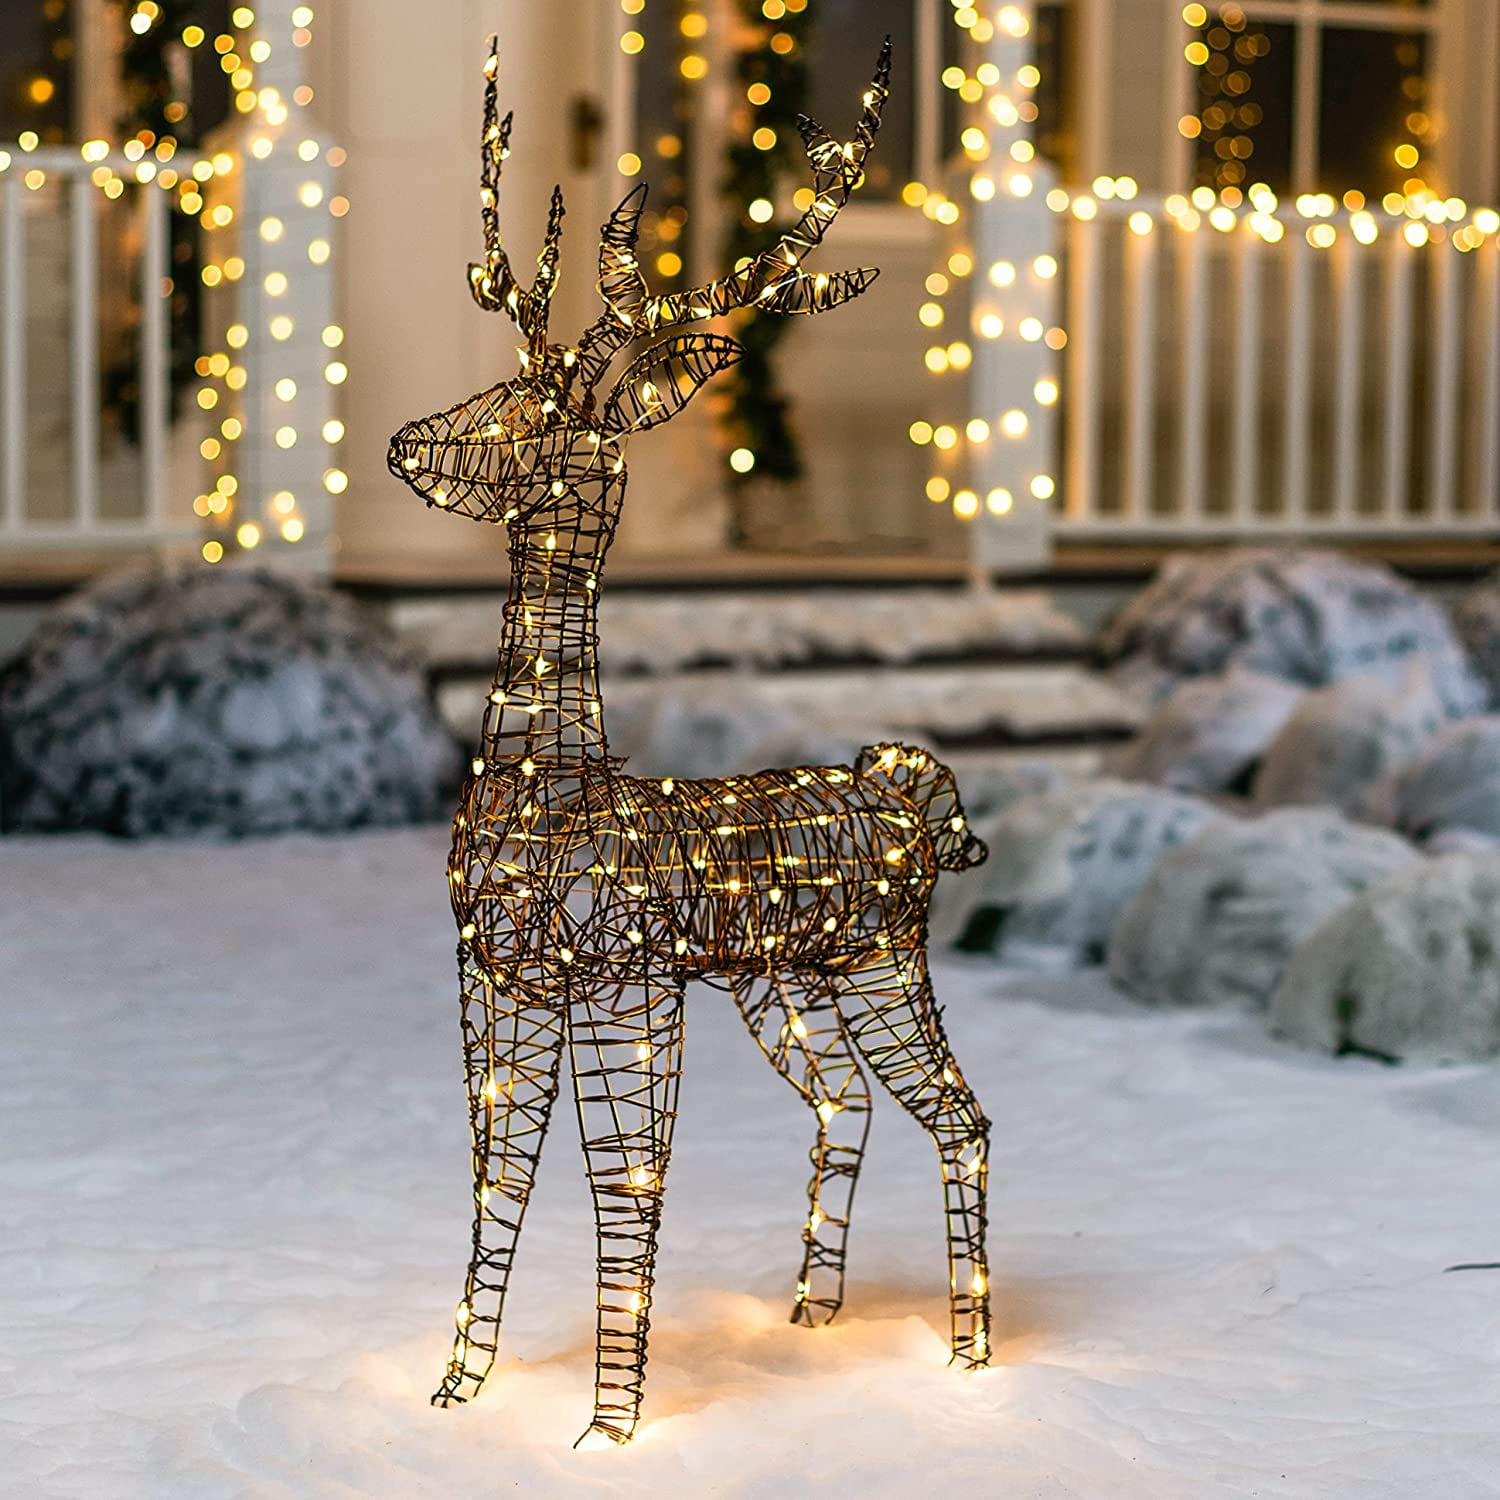 STAG IN FOREST SILHOUETTE LED Christmas Ornament 30cm WHITE Wood Warm LED